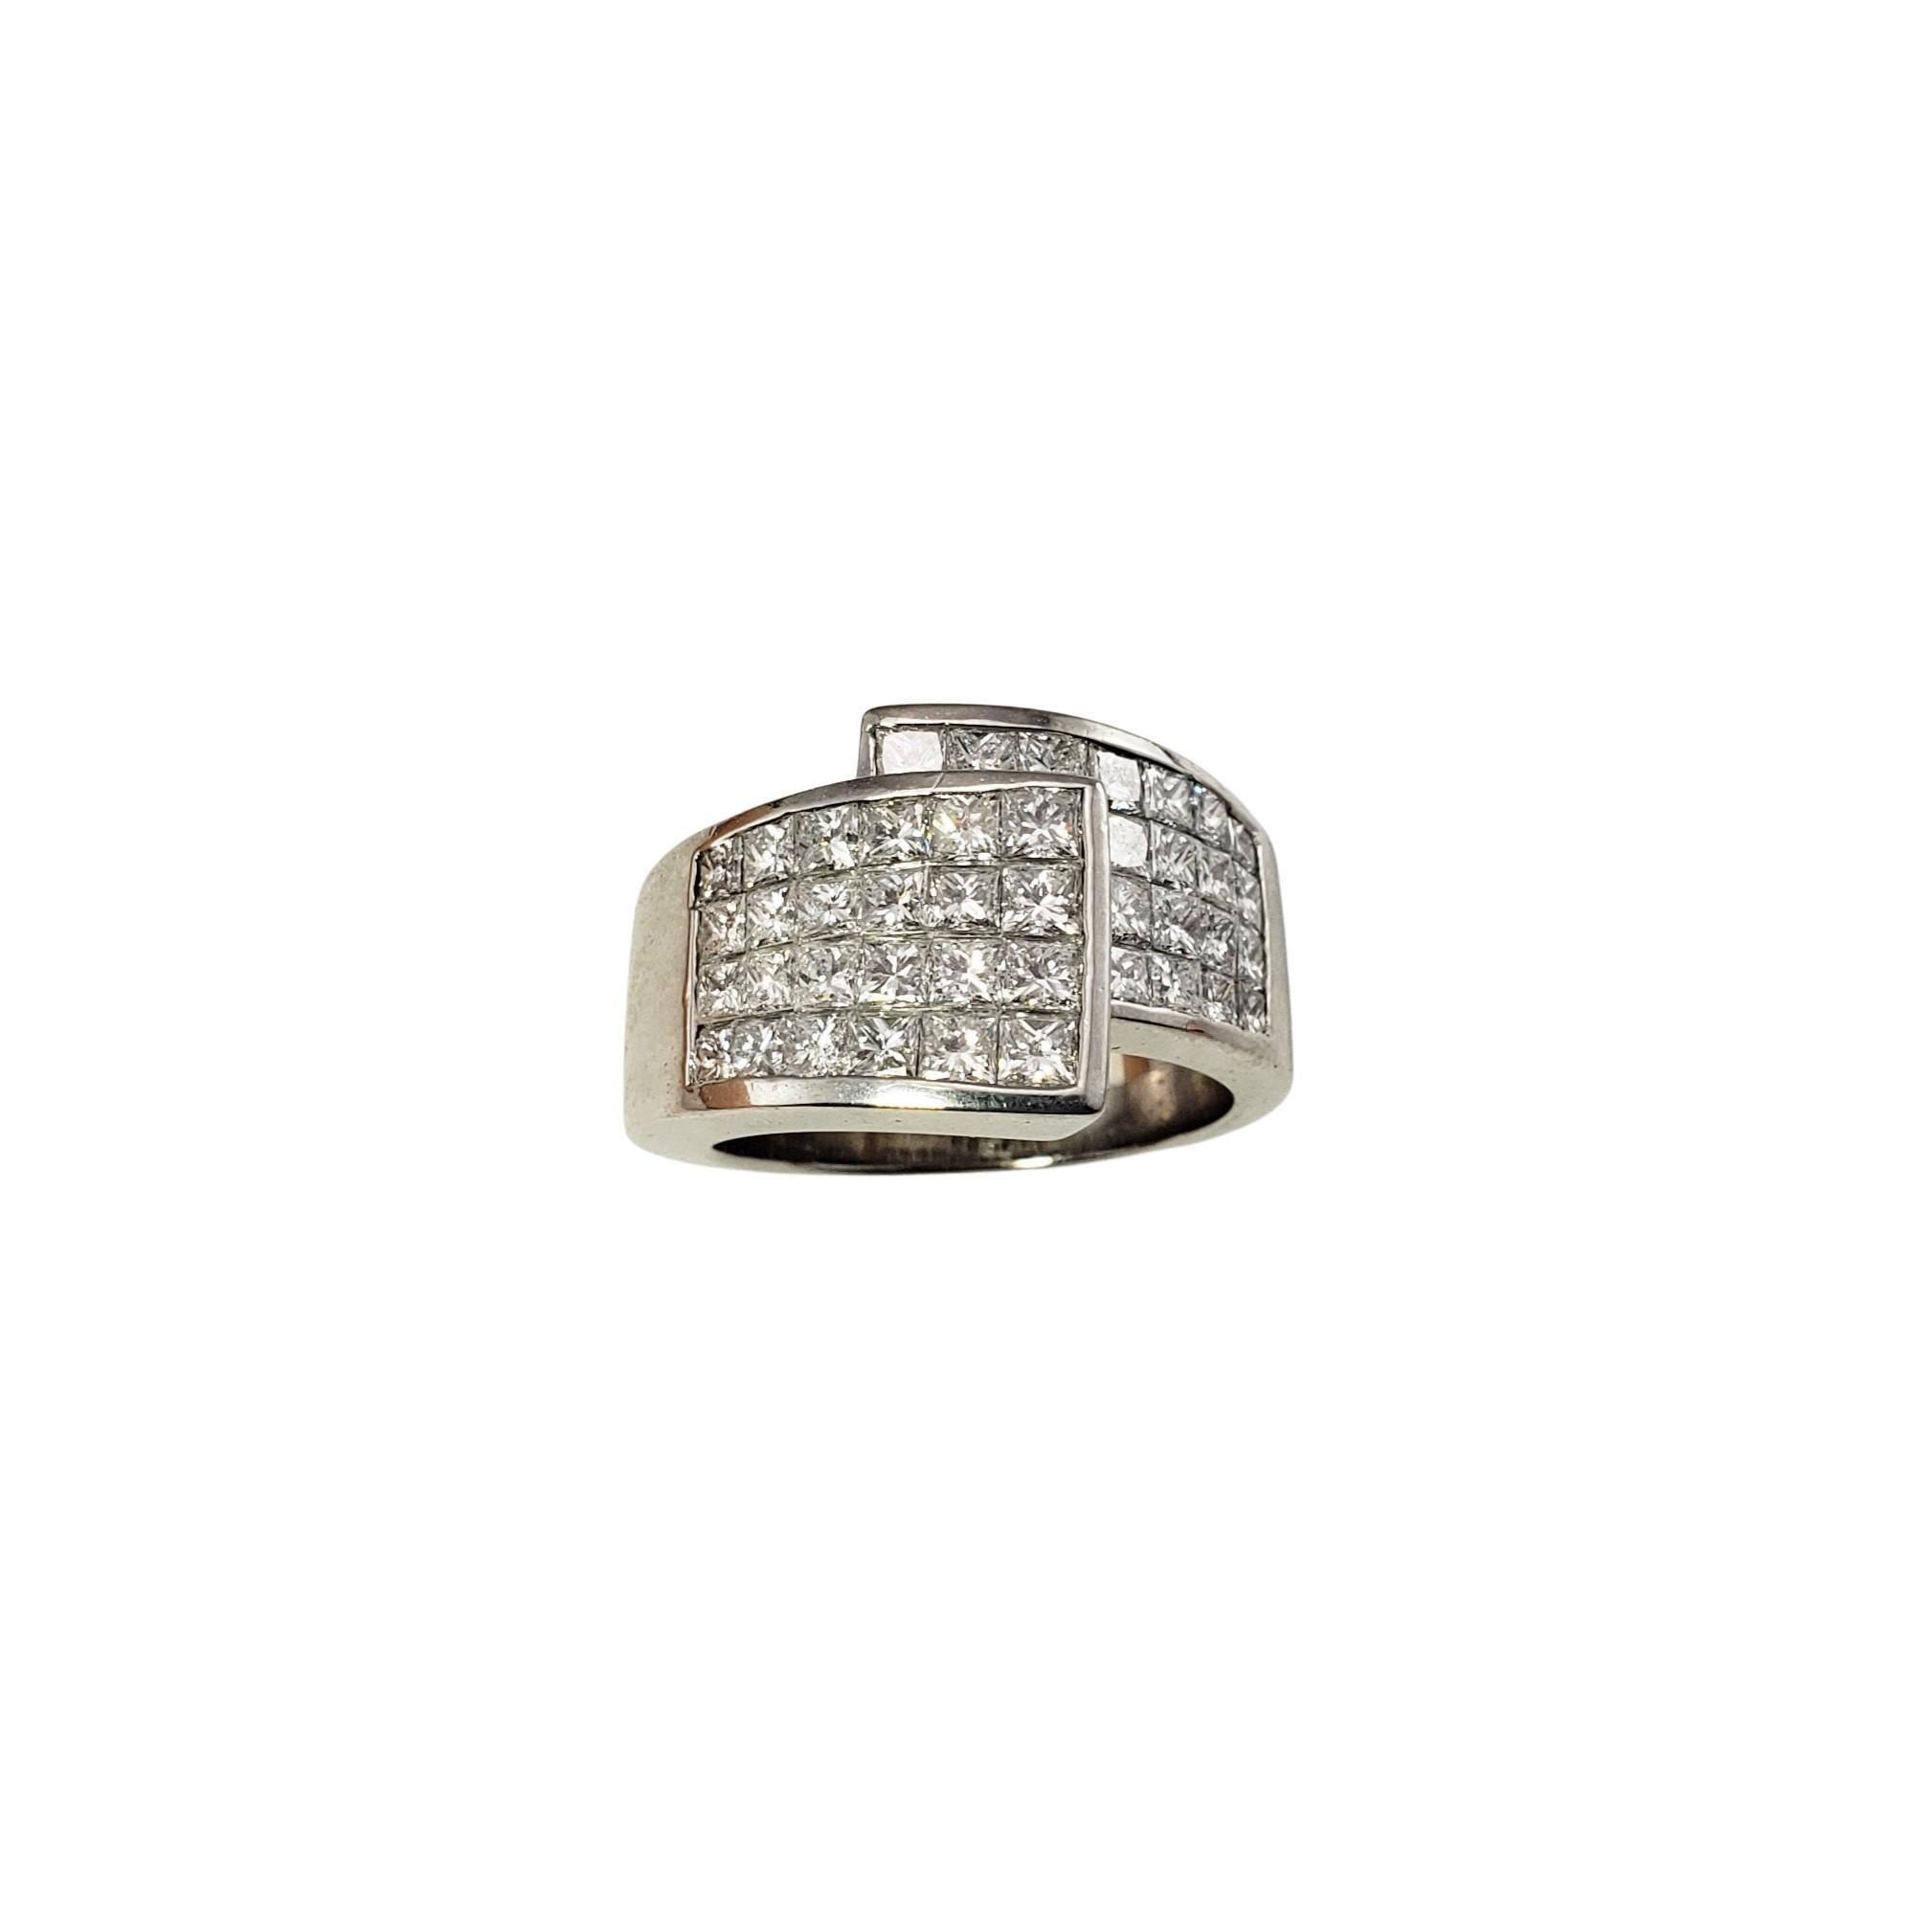 Platinum and Diamond Ring Size 7-

This sparkling ring features 43 princess cut diamonds set in beautifully detailed platinum.  Width:  14 mm.  Shank:  6 mm.

Approximate total diamond weight: 2.95 ct.

Diamond color: I

Diamond clarity: